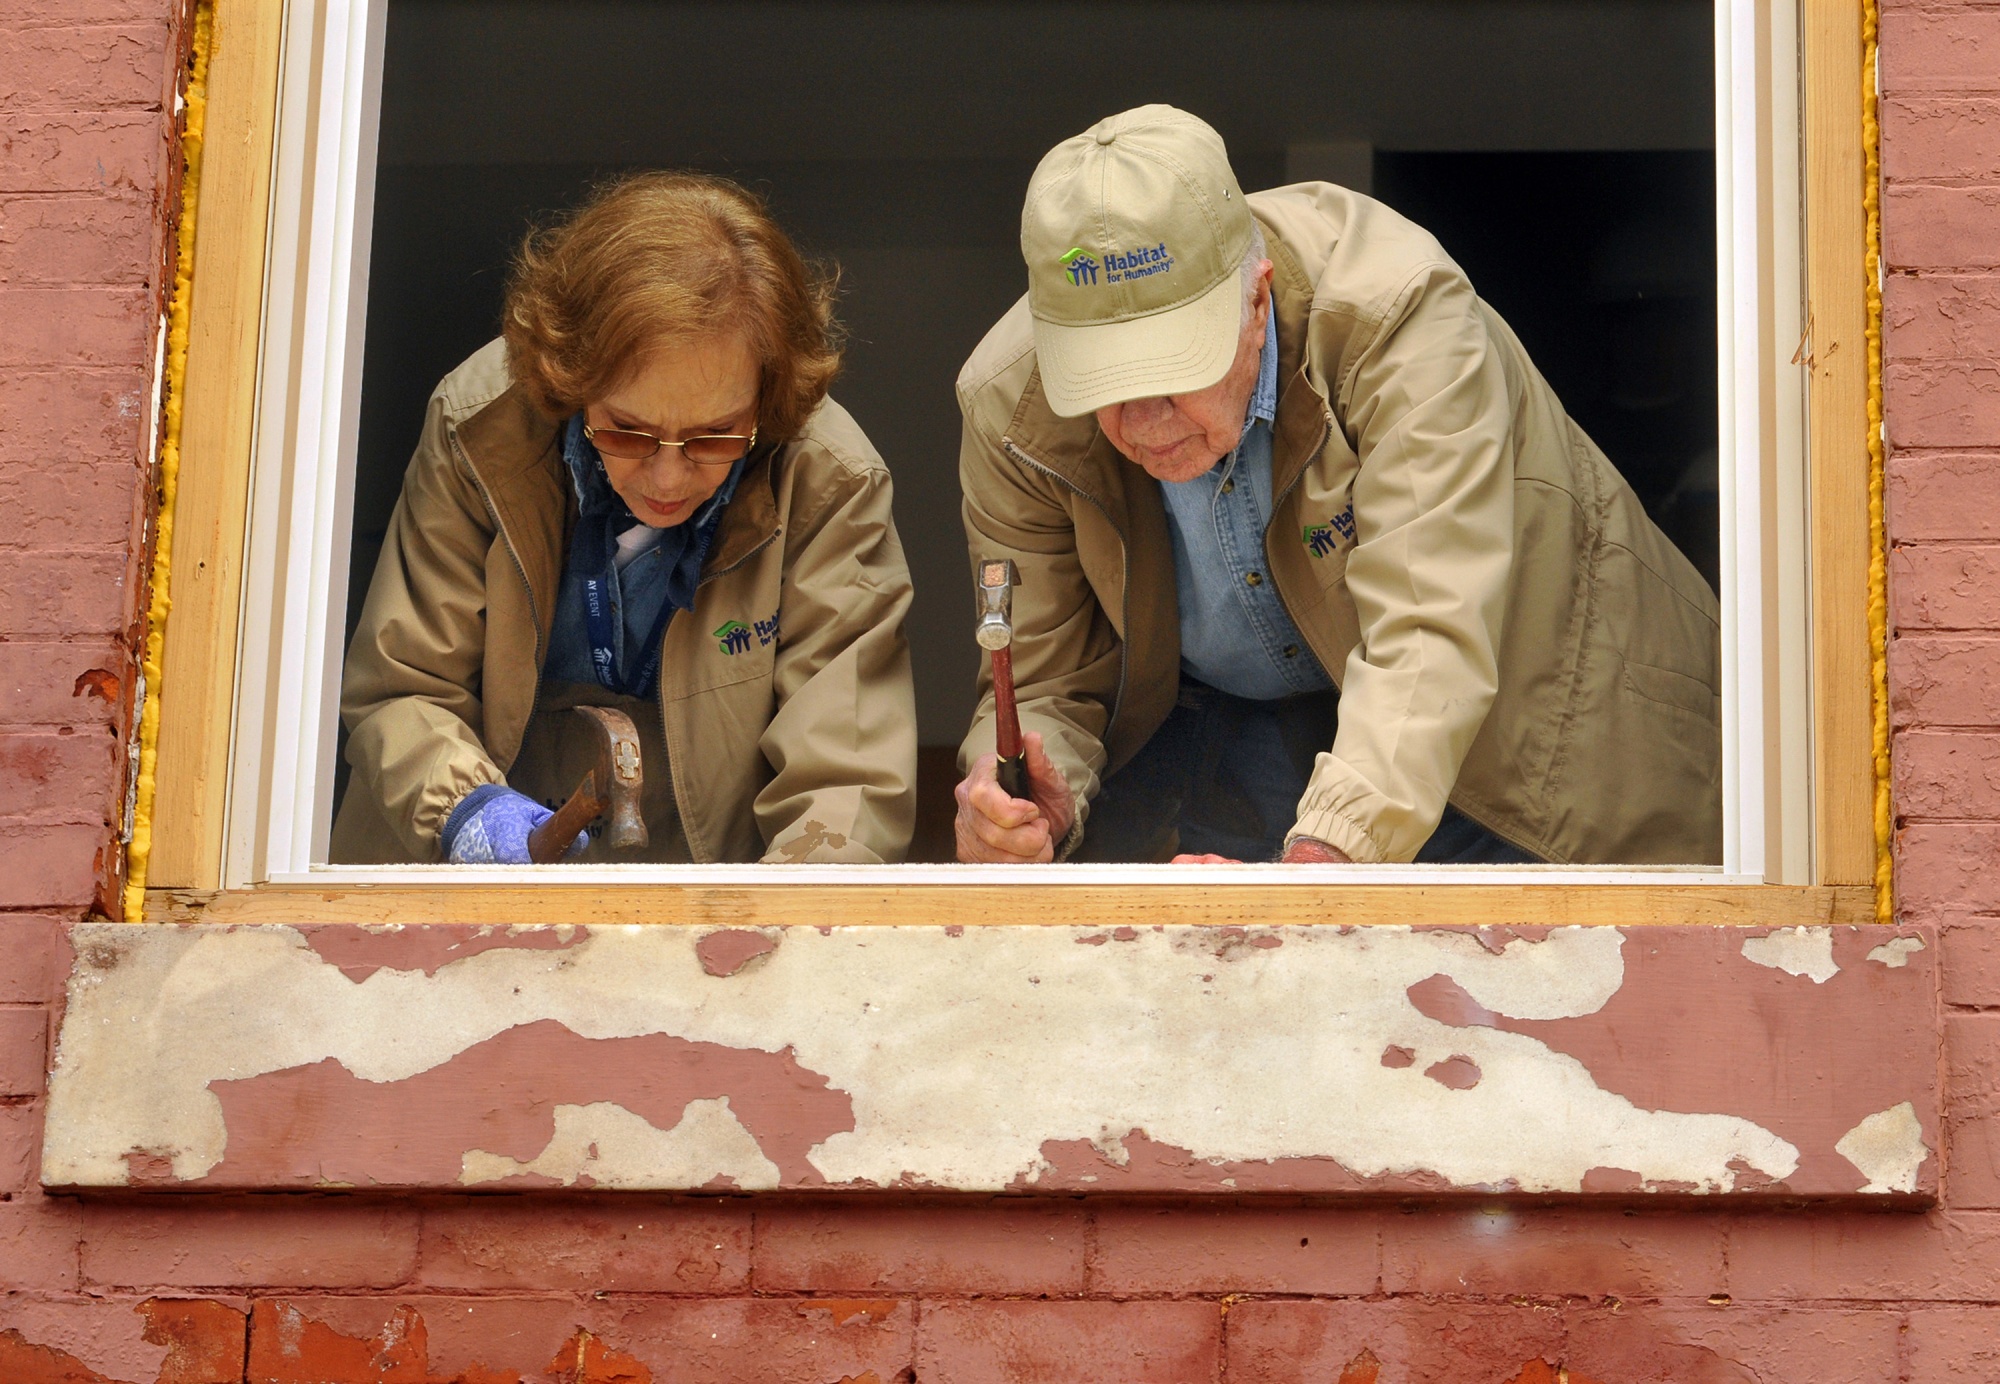 Former President Jimmy Carter and Rosalynn Carter at work renovating a rowhouse in Baltimore in&nbsp;2010.&nbsp;